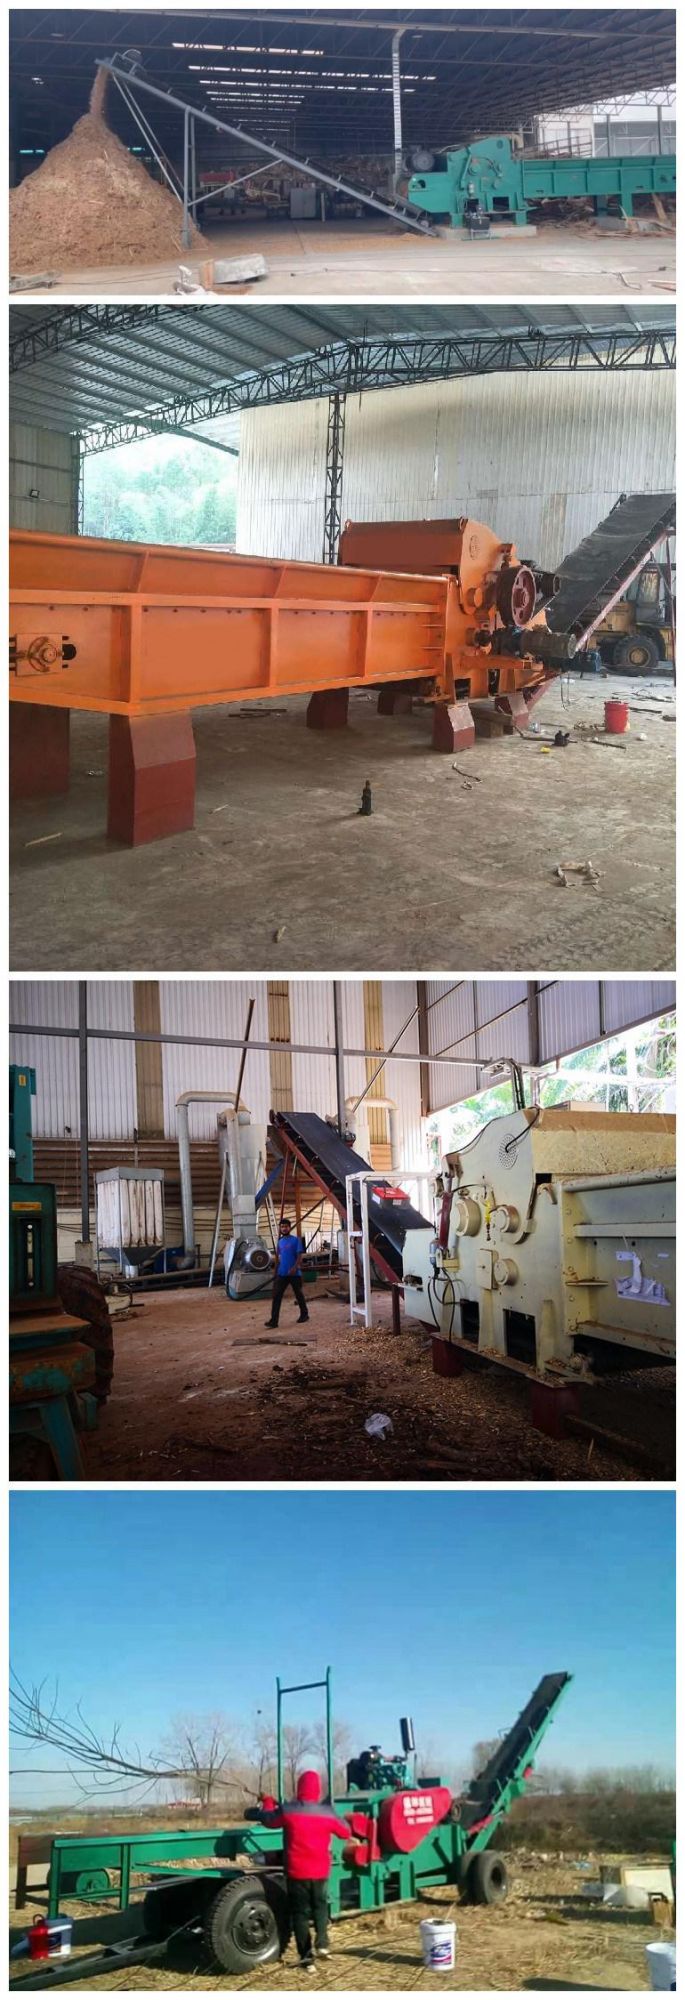 Composite Crusher Multifunctional Wood Chipper Wood Chip Machine